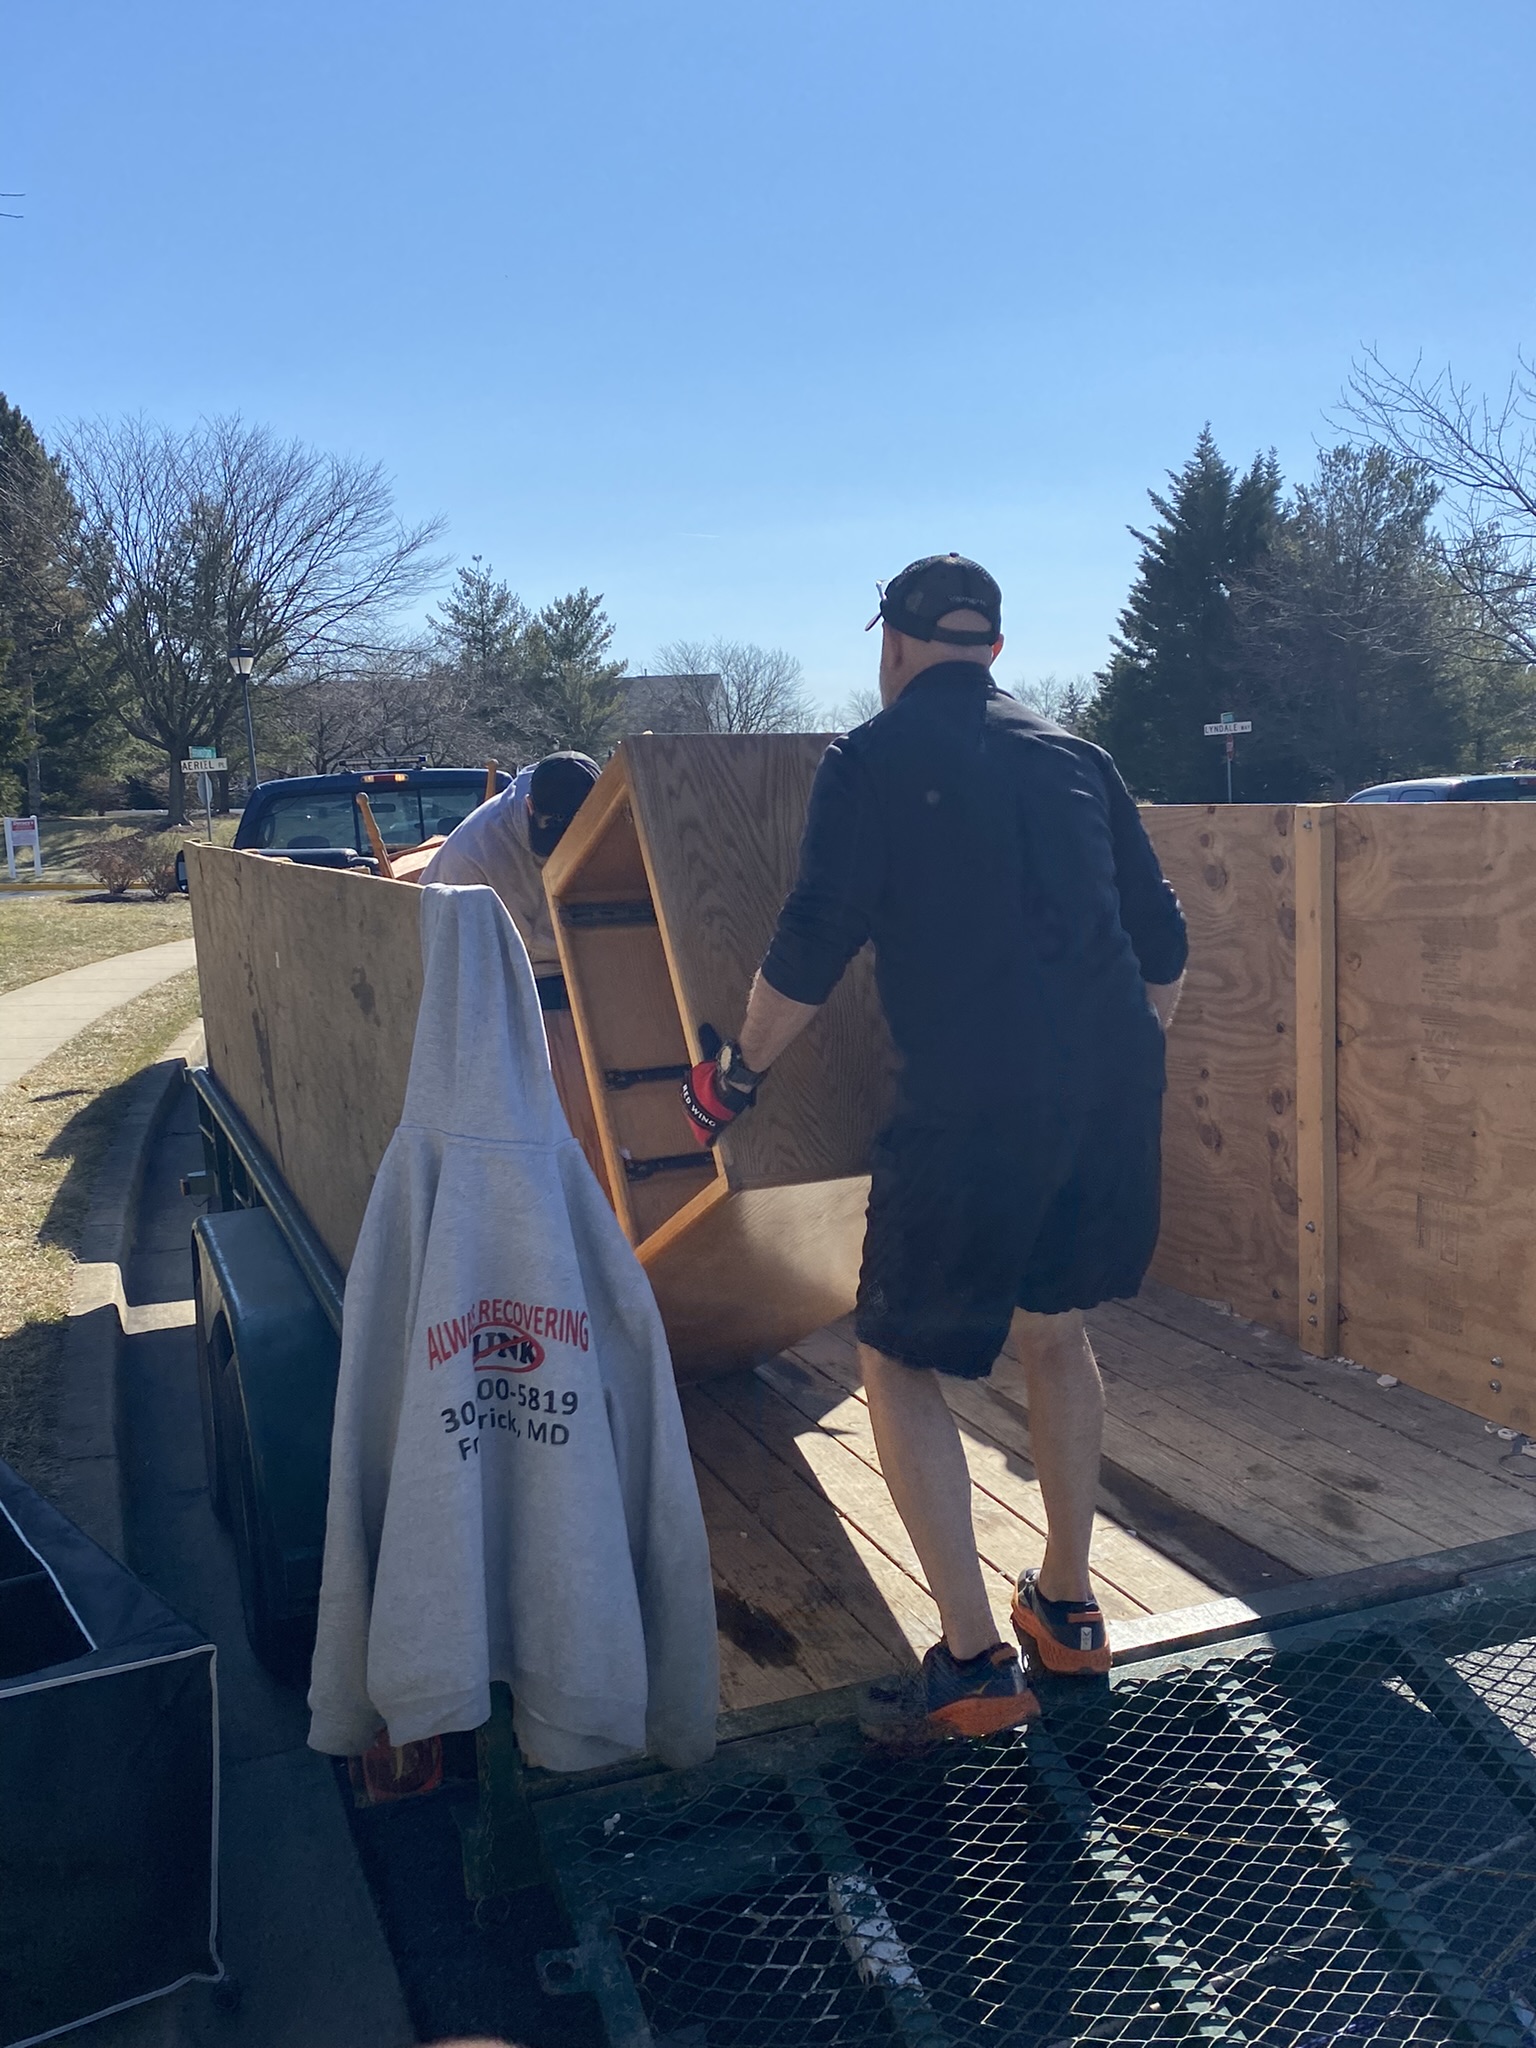 One of our team members loading a piece of furniture onto our trailer during junk removal services in rockville md